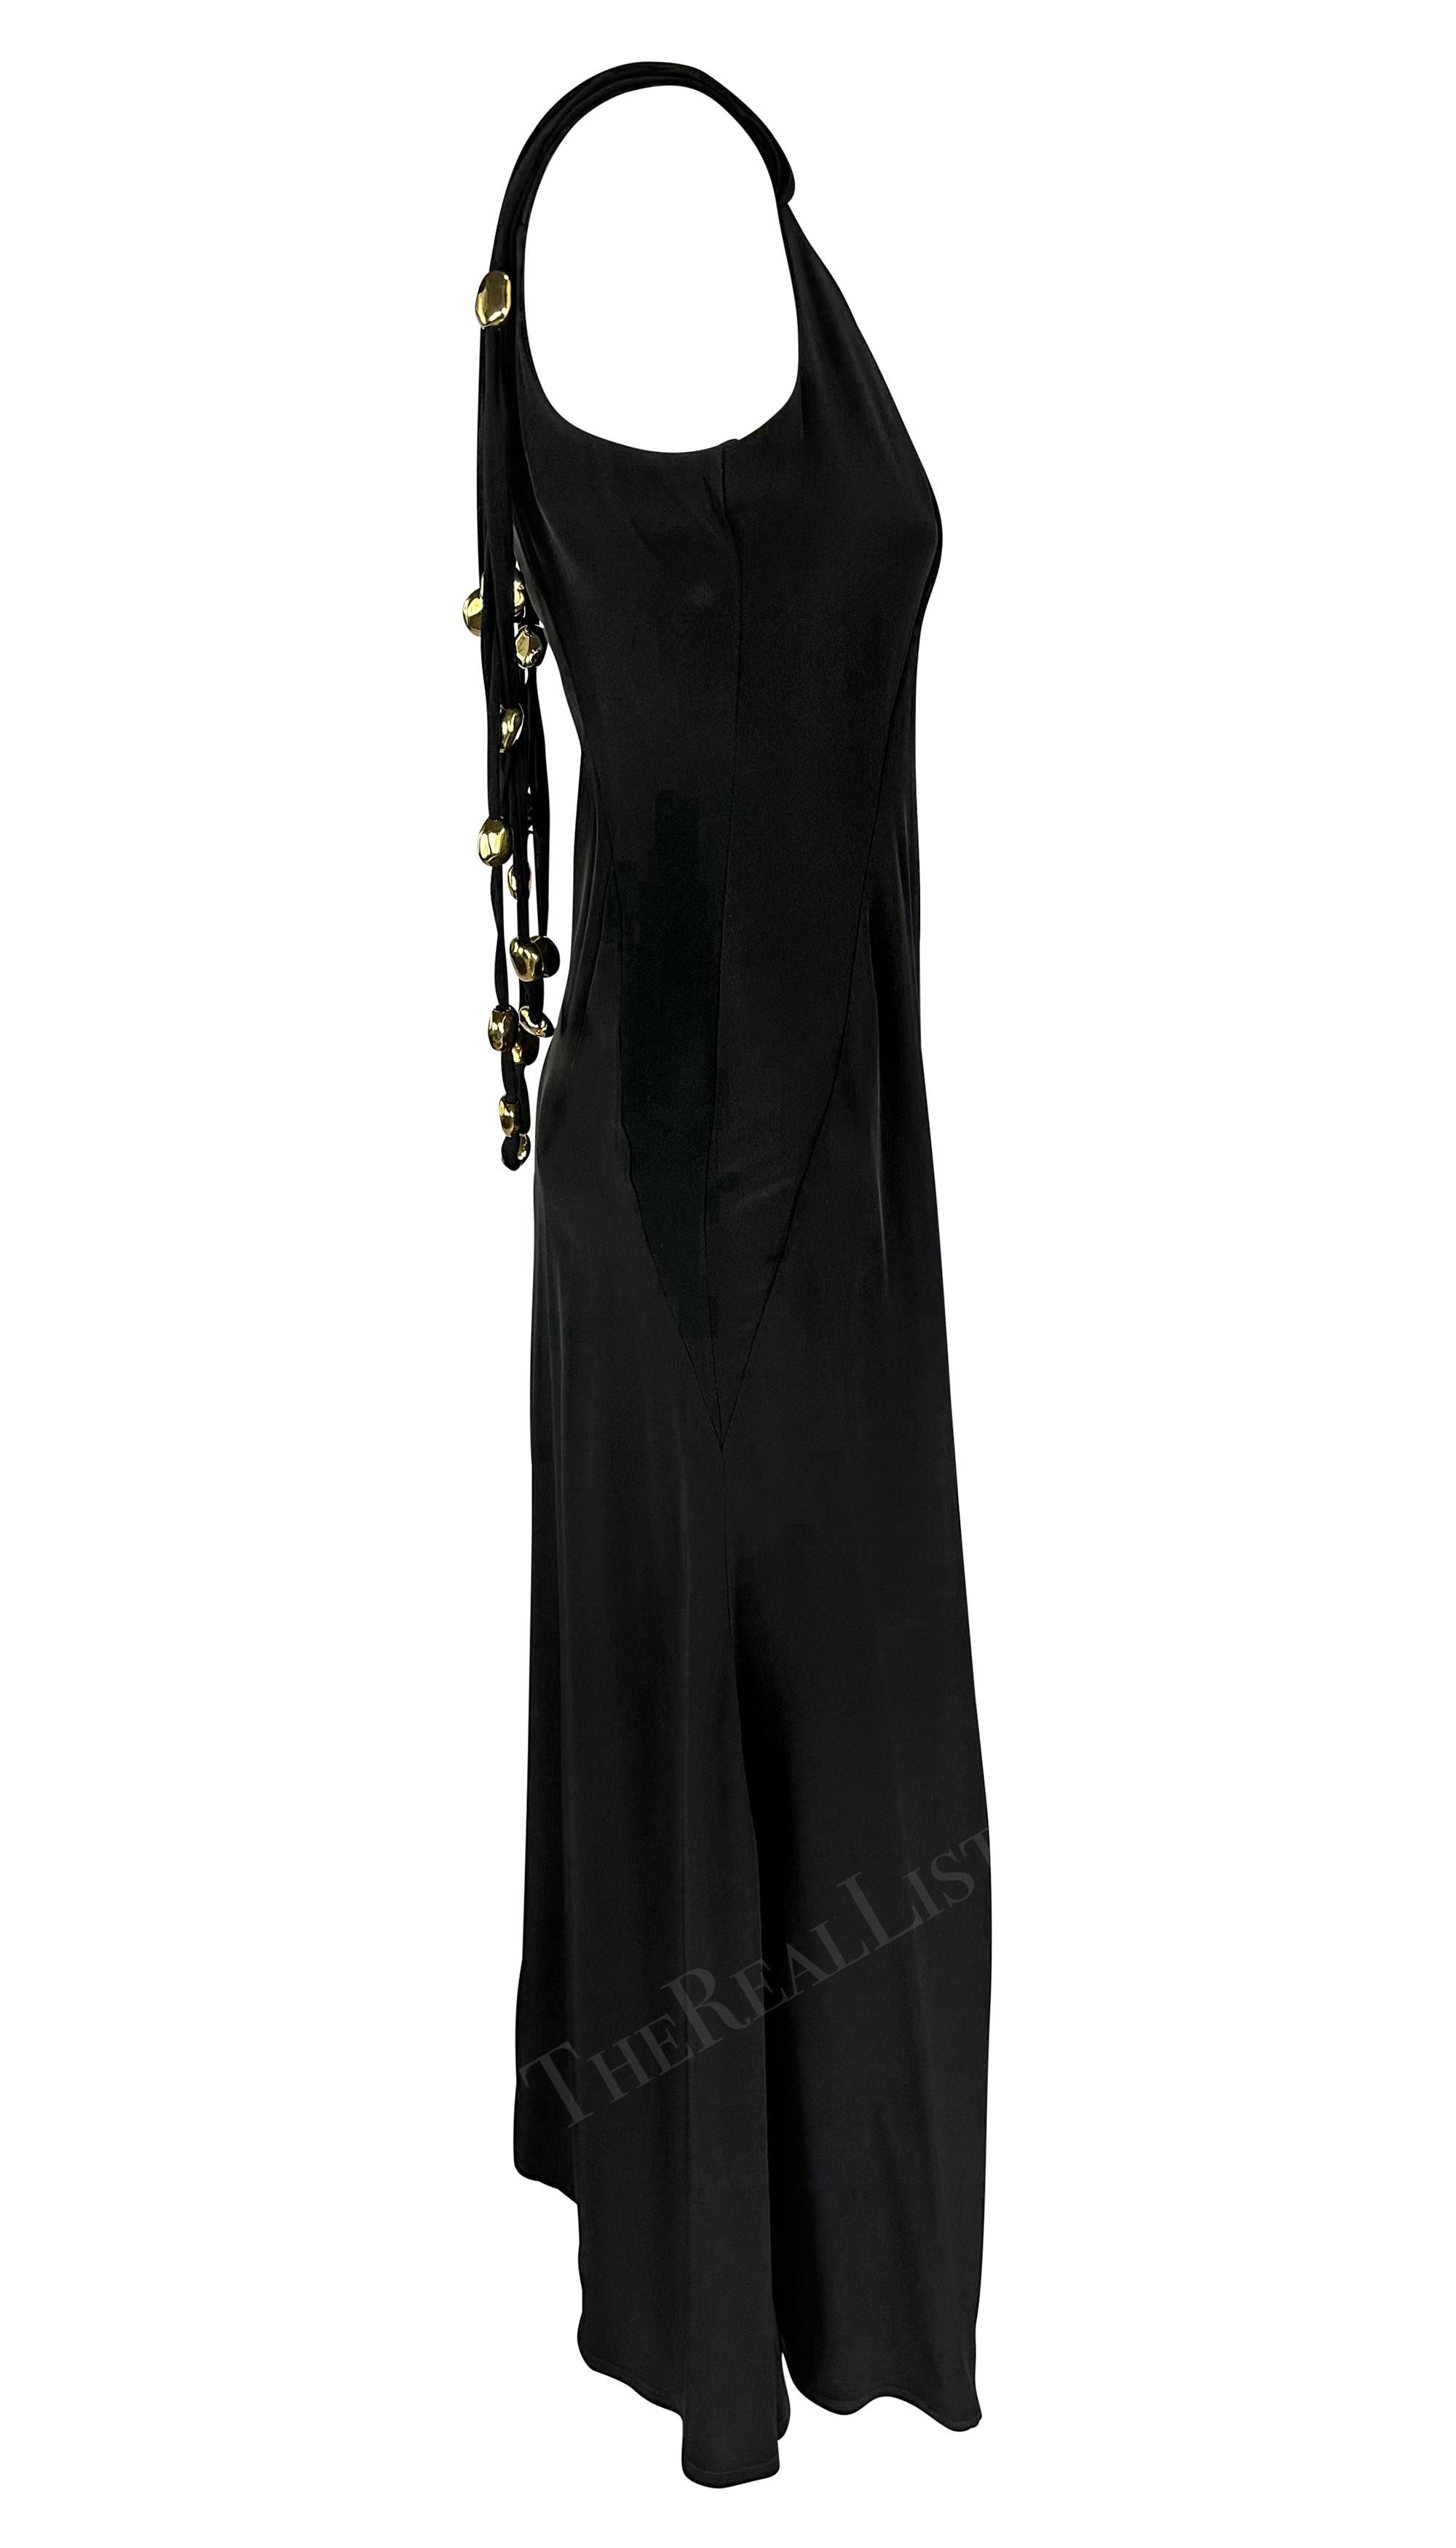 S/S 1993 Christian Lacroix Runway Black Gold Sculptural Jewelry Bead Gown For Sale 6